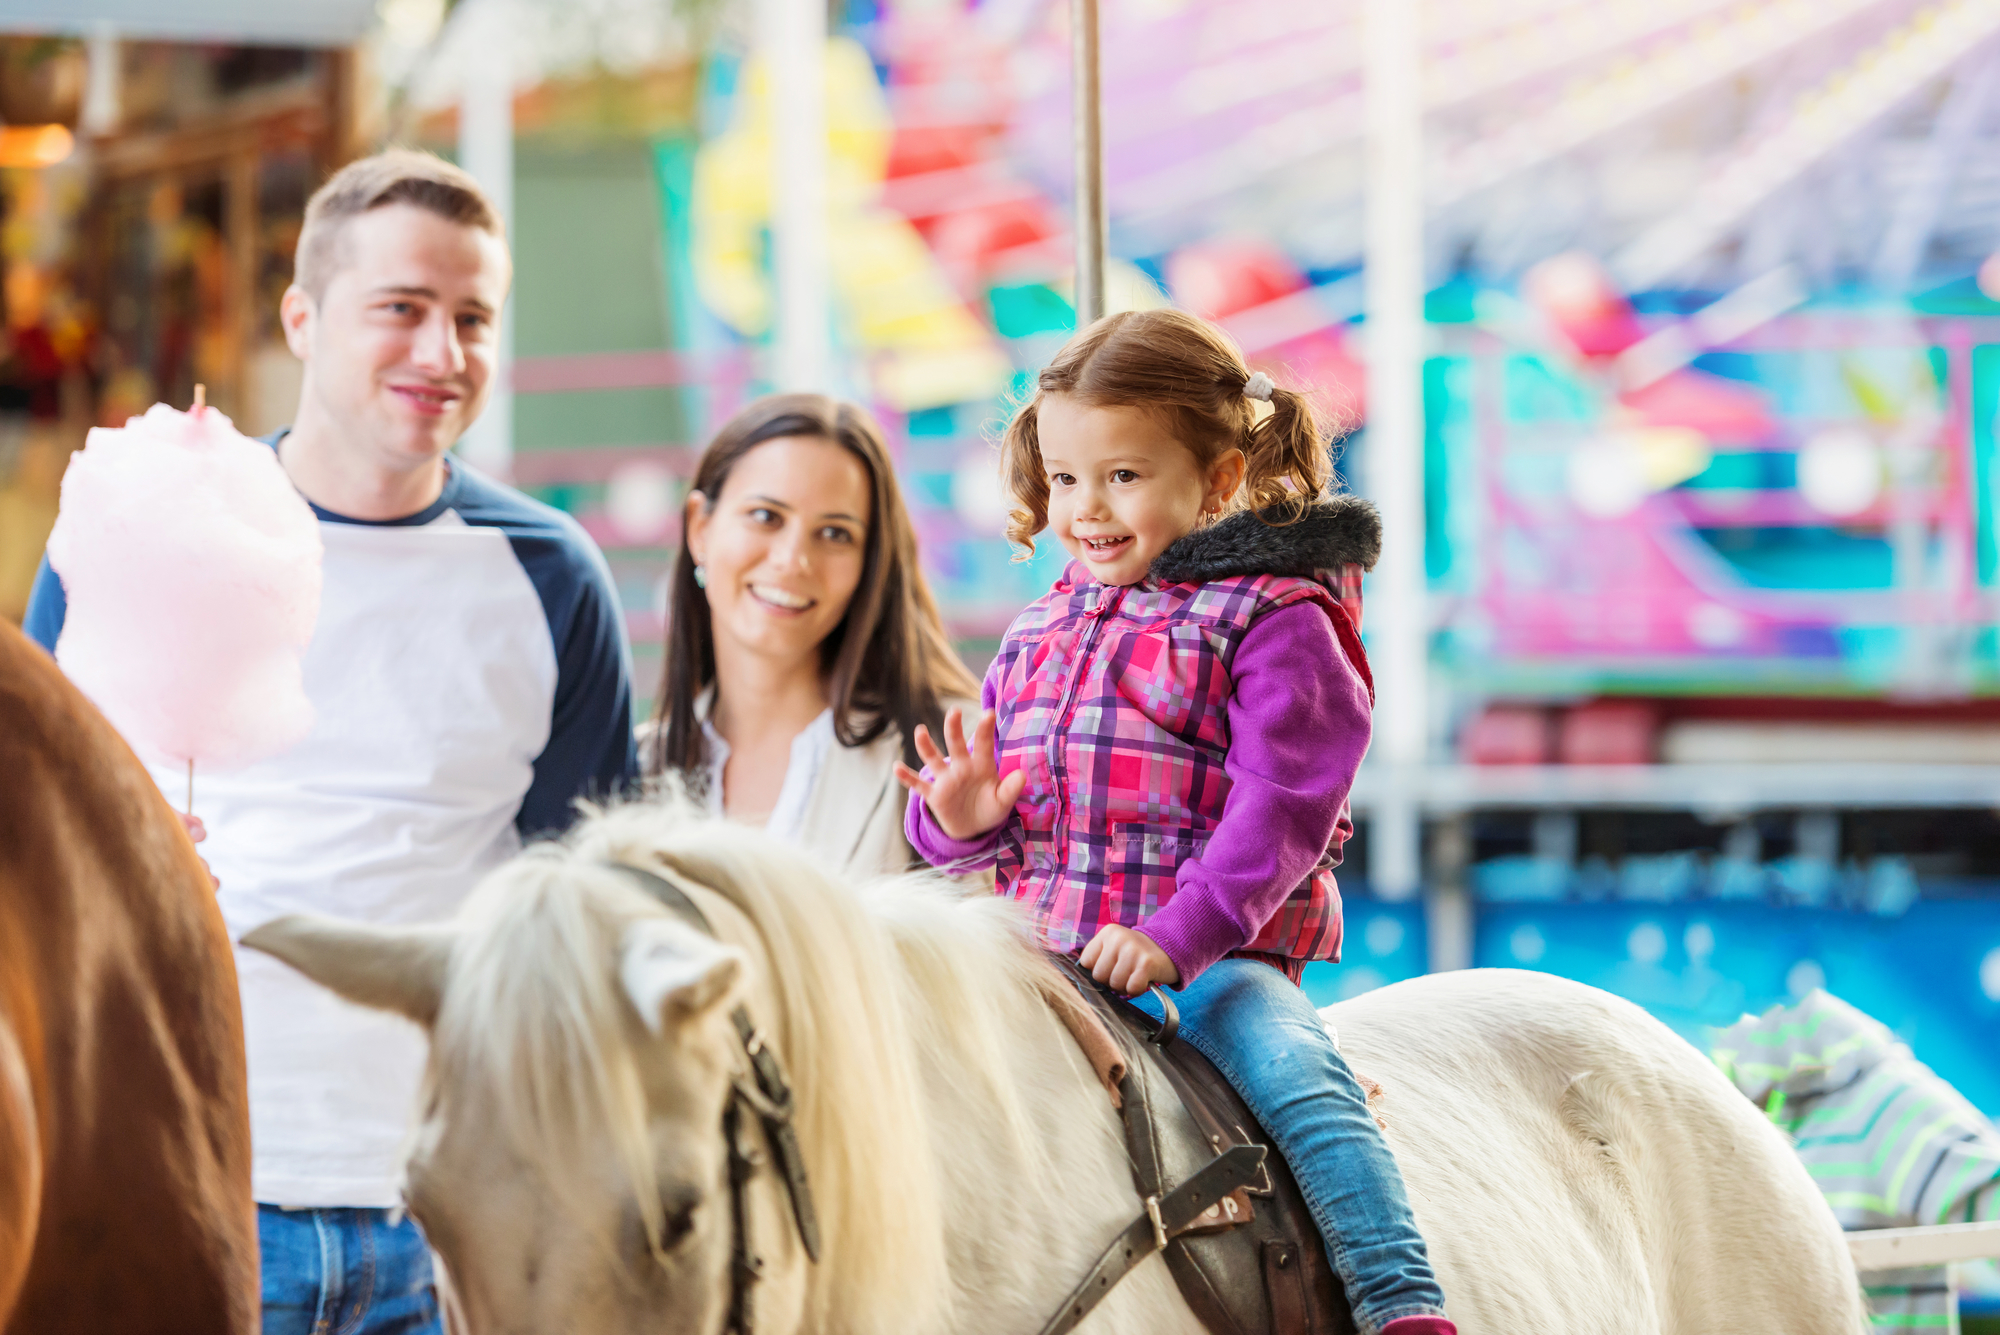 2018 Guide to Fall Fairs and Festivals in the Stateline